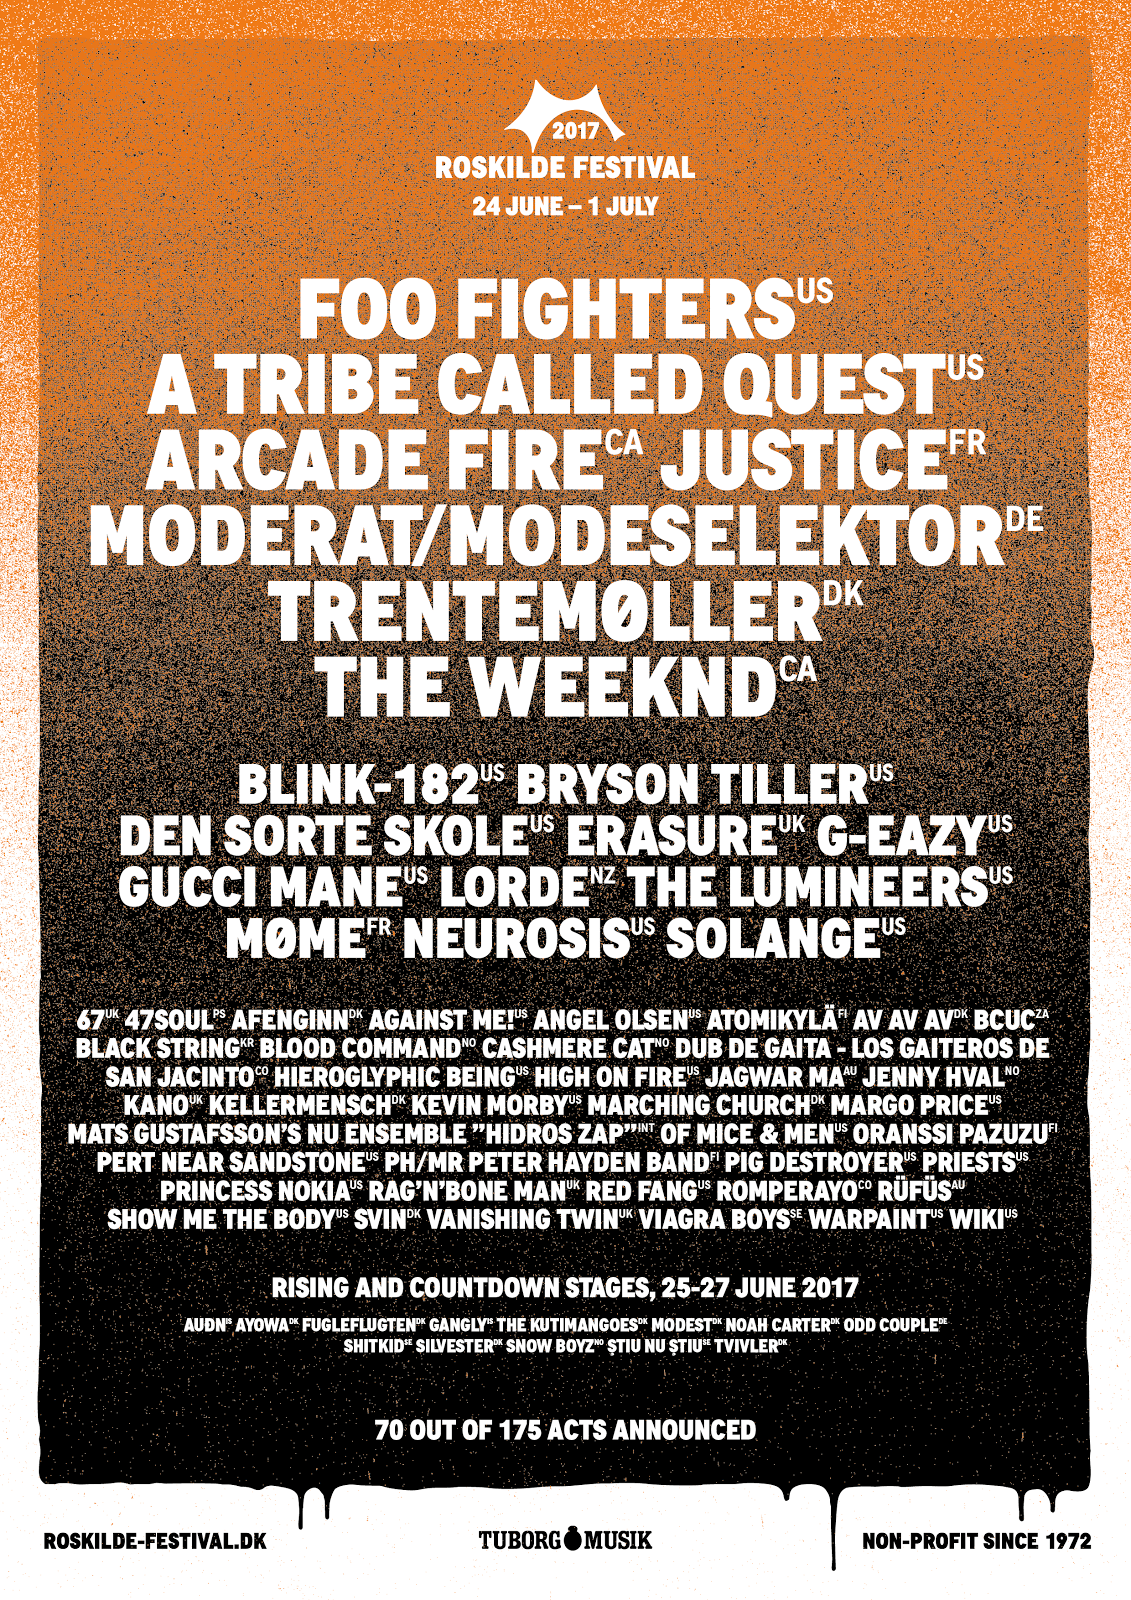 IhouseU.com | Tribe Called Quest, Lorde, Gucci Mane, Bryson Tiller & More For Roskilde 2017